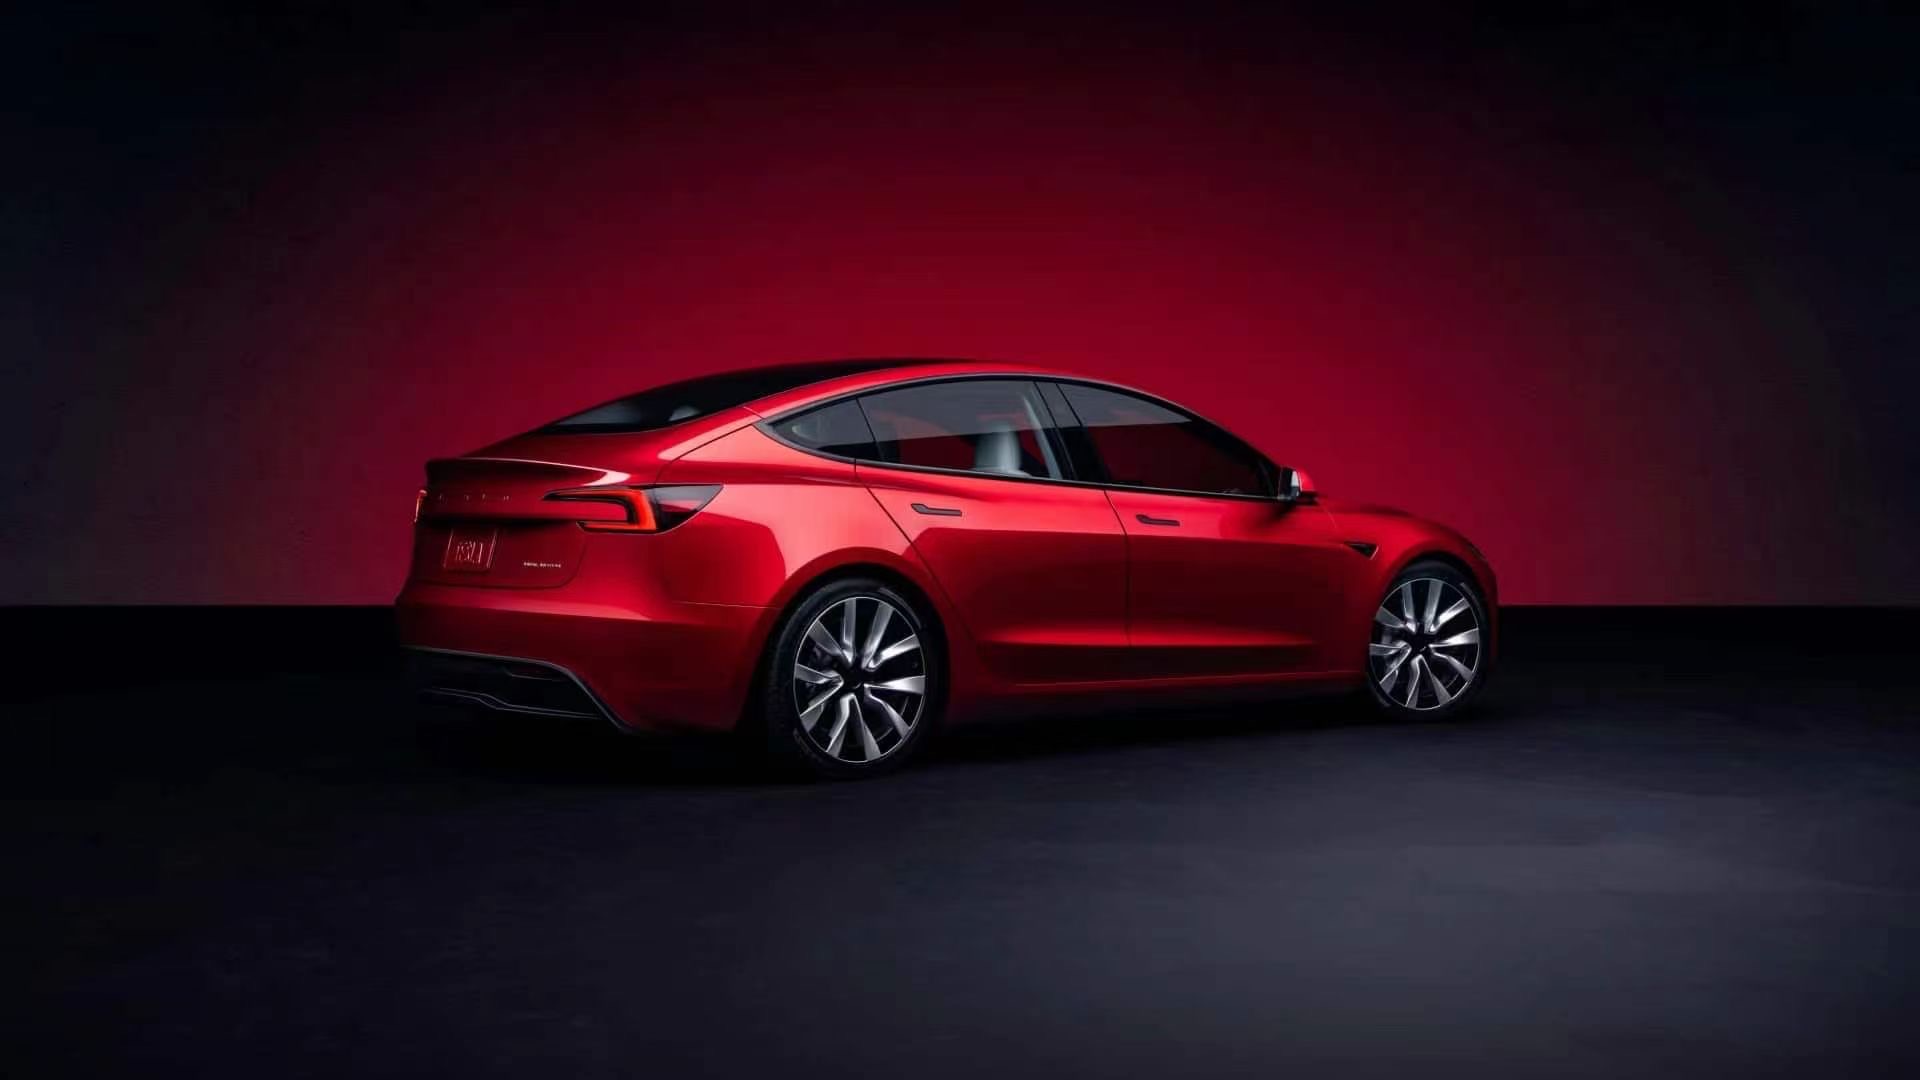 Tesla prices revamped Model 3 higher than expected in China · TechNode #chicomnews